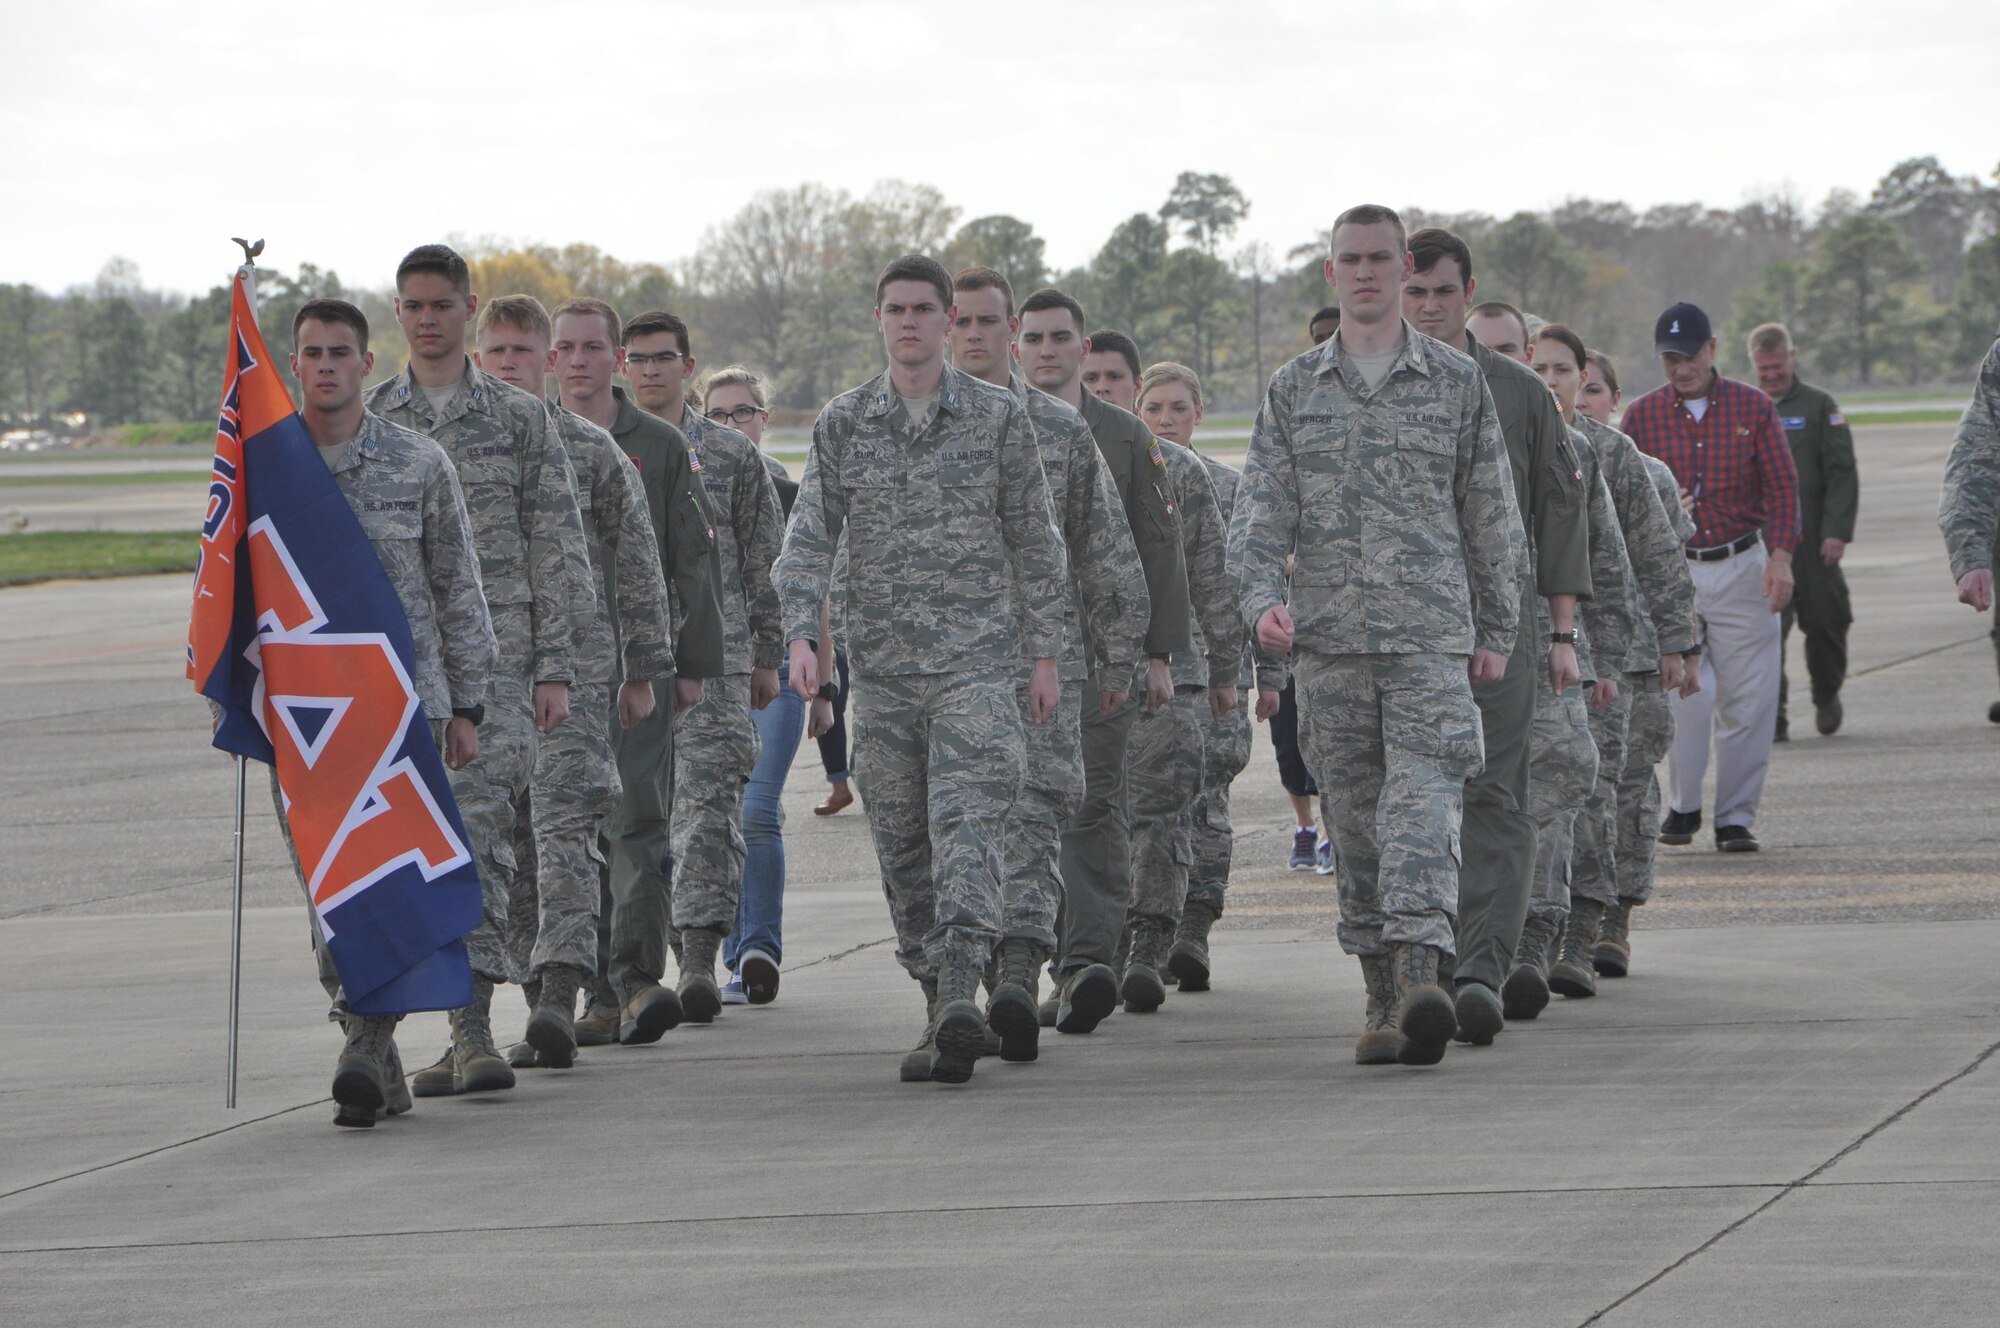 Cadets from Auburn University’s Air Force ROTC Detachment march an Auburn flag from Aircraft Tail Number 85-0040 known as "War Eagle" to Aircraft Tail Number 91-9142 during a Transfer of Heritage ceremony Feb. 24, at Maxwell Air Force Base.  Aircraft 91-9142, which will now carry the “War Eagle” legacy, came to the 908th Airlift Wing at Maxwell from the 914th Airlift Wing at Niagara Falls Air Reserve Station, New York. (U.S. Air Force photo by Bradley J. Clark)